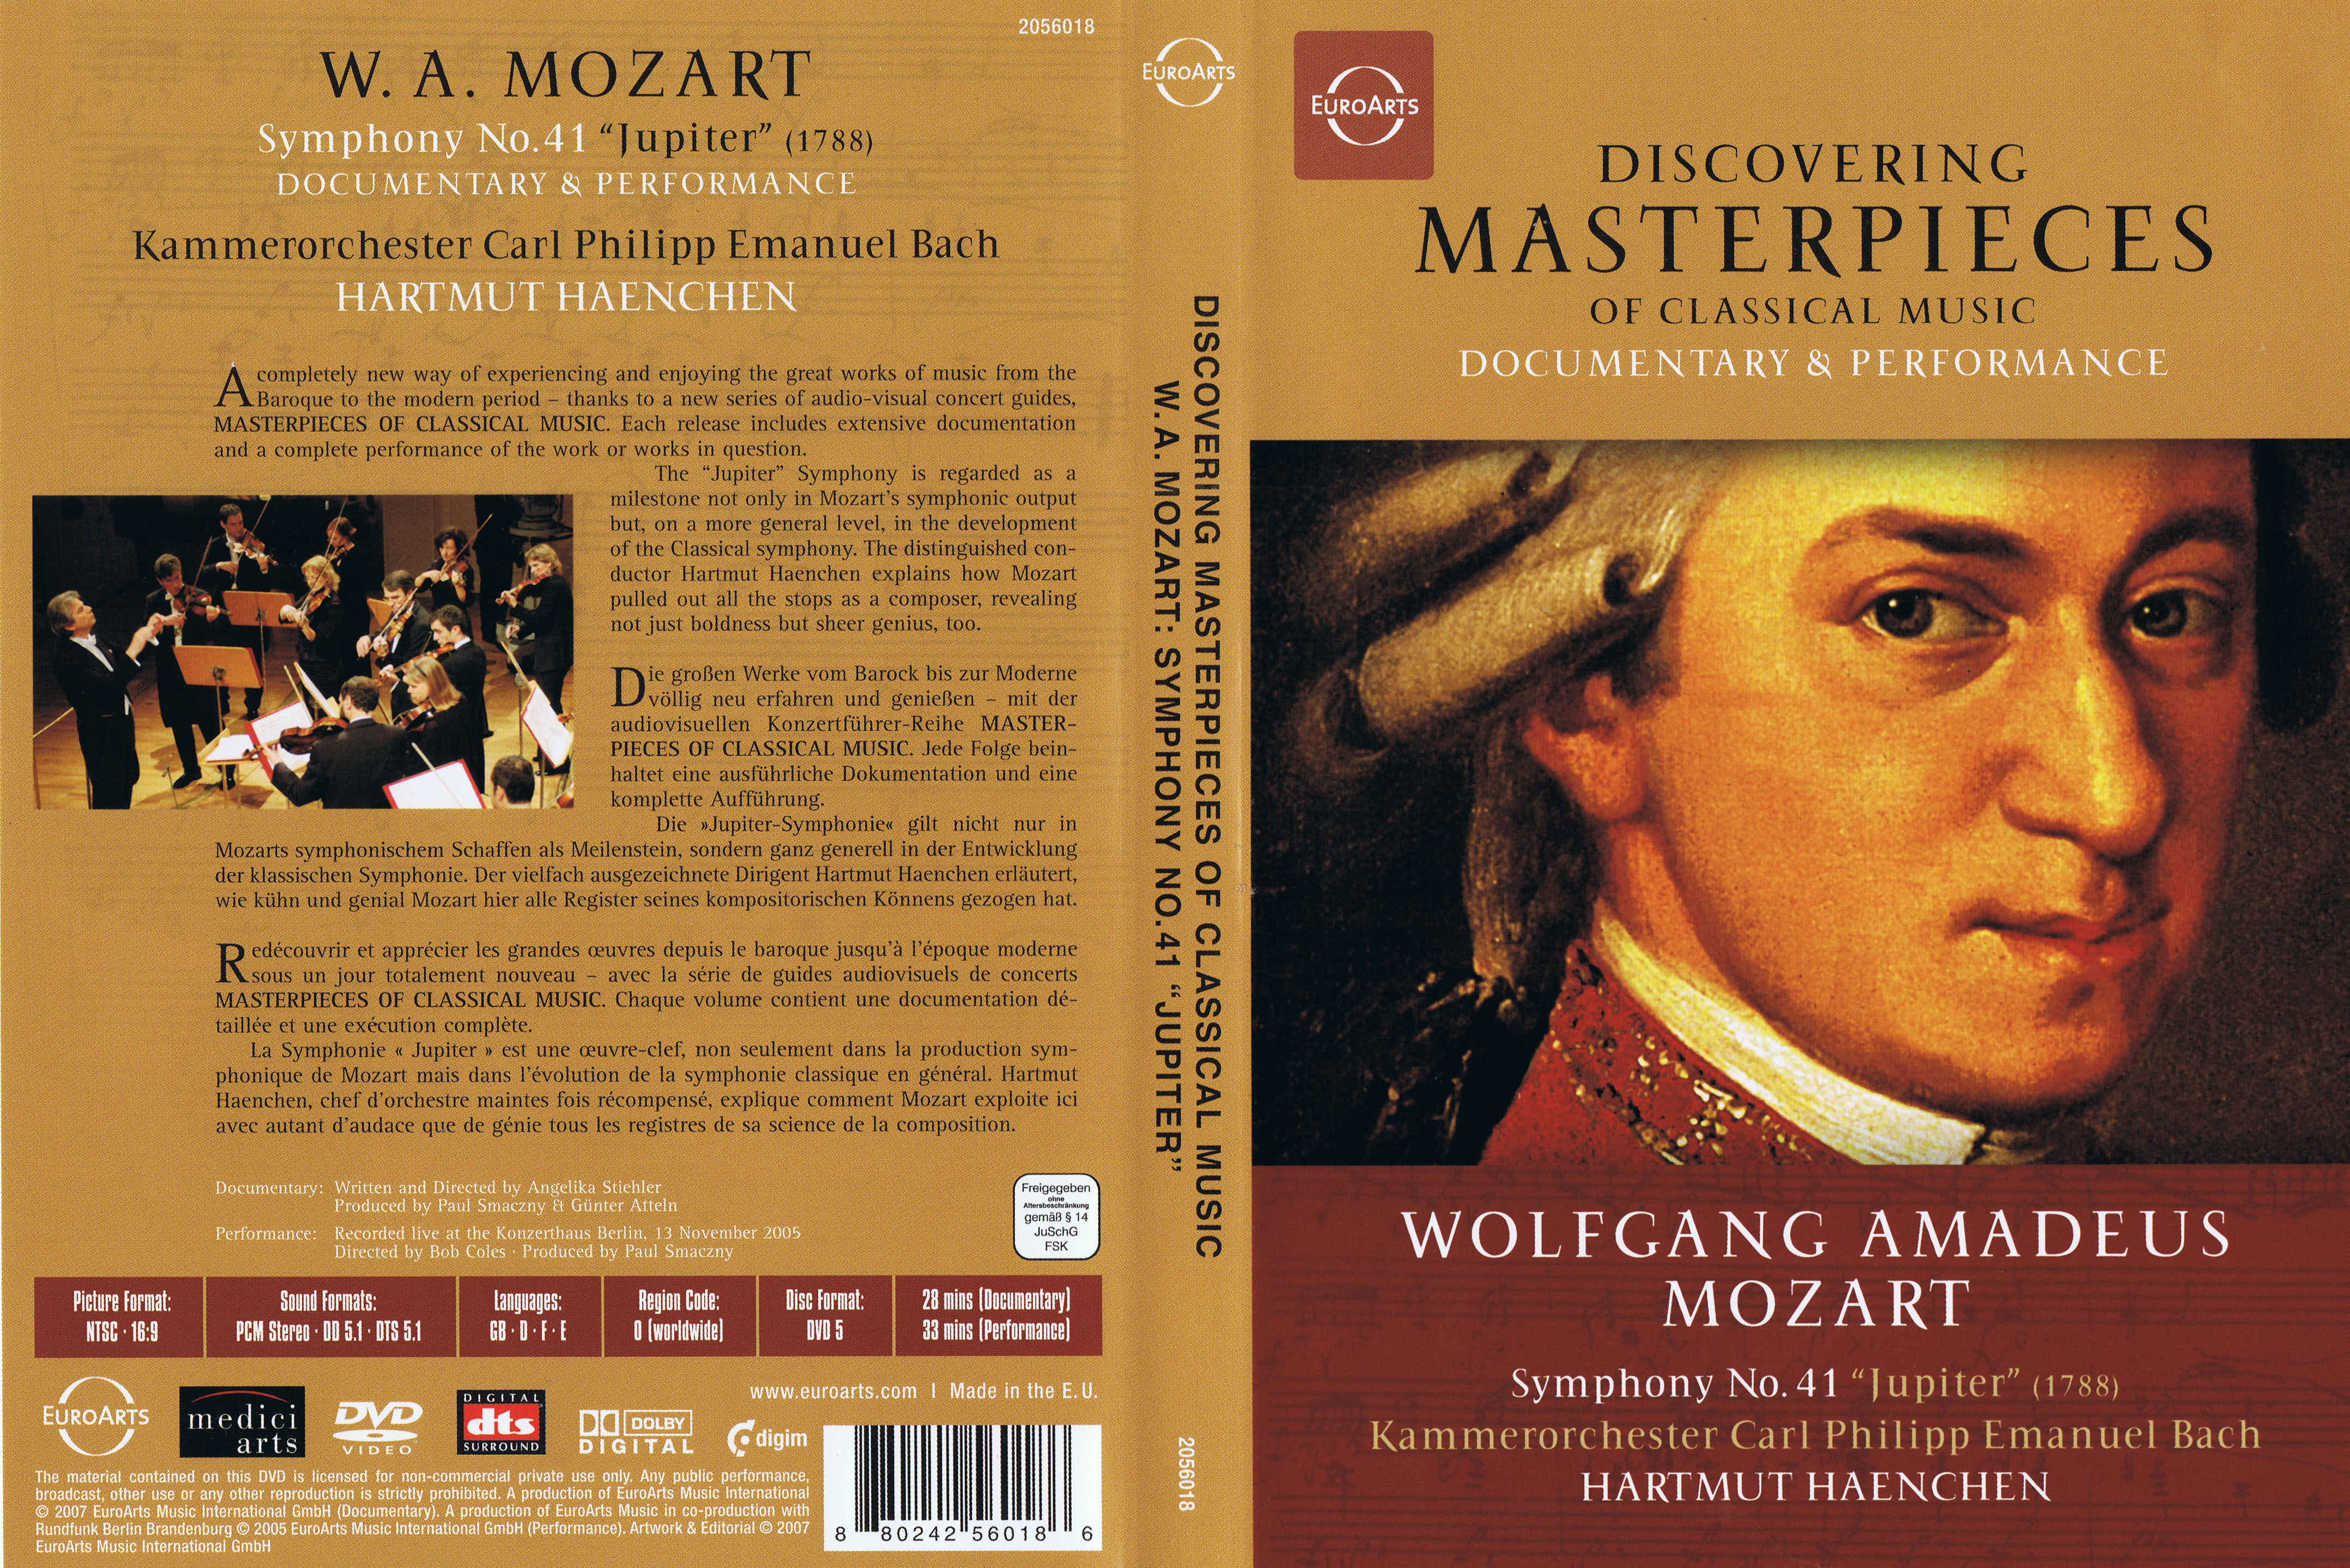 Jaquette DVD Discovering masterpieces - Wolfgang Amadeus Mozart